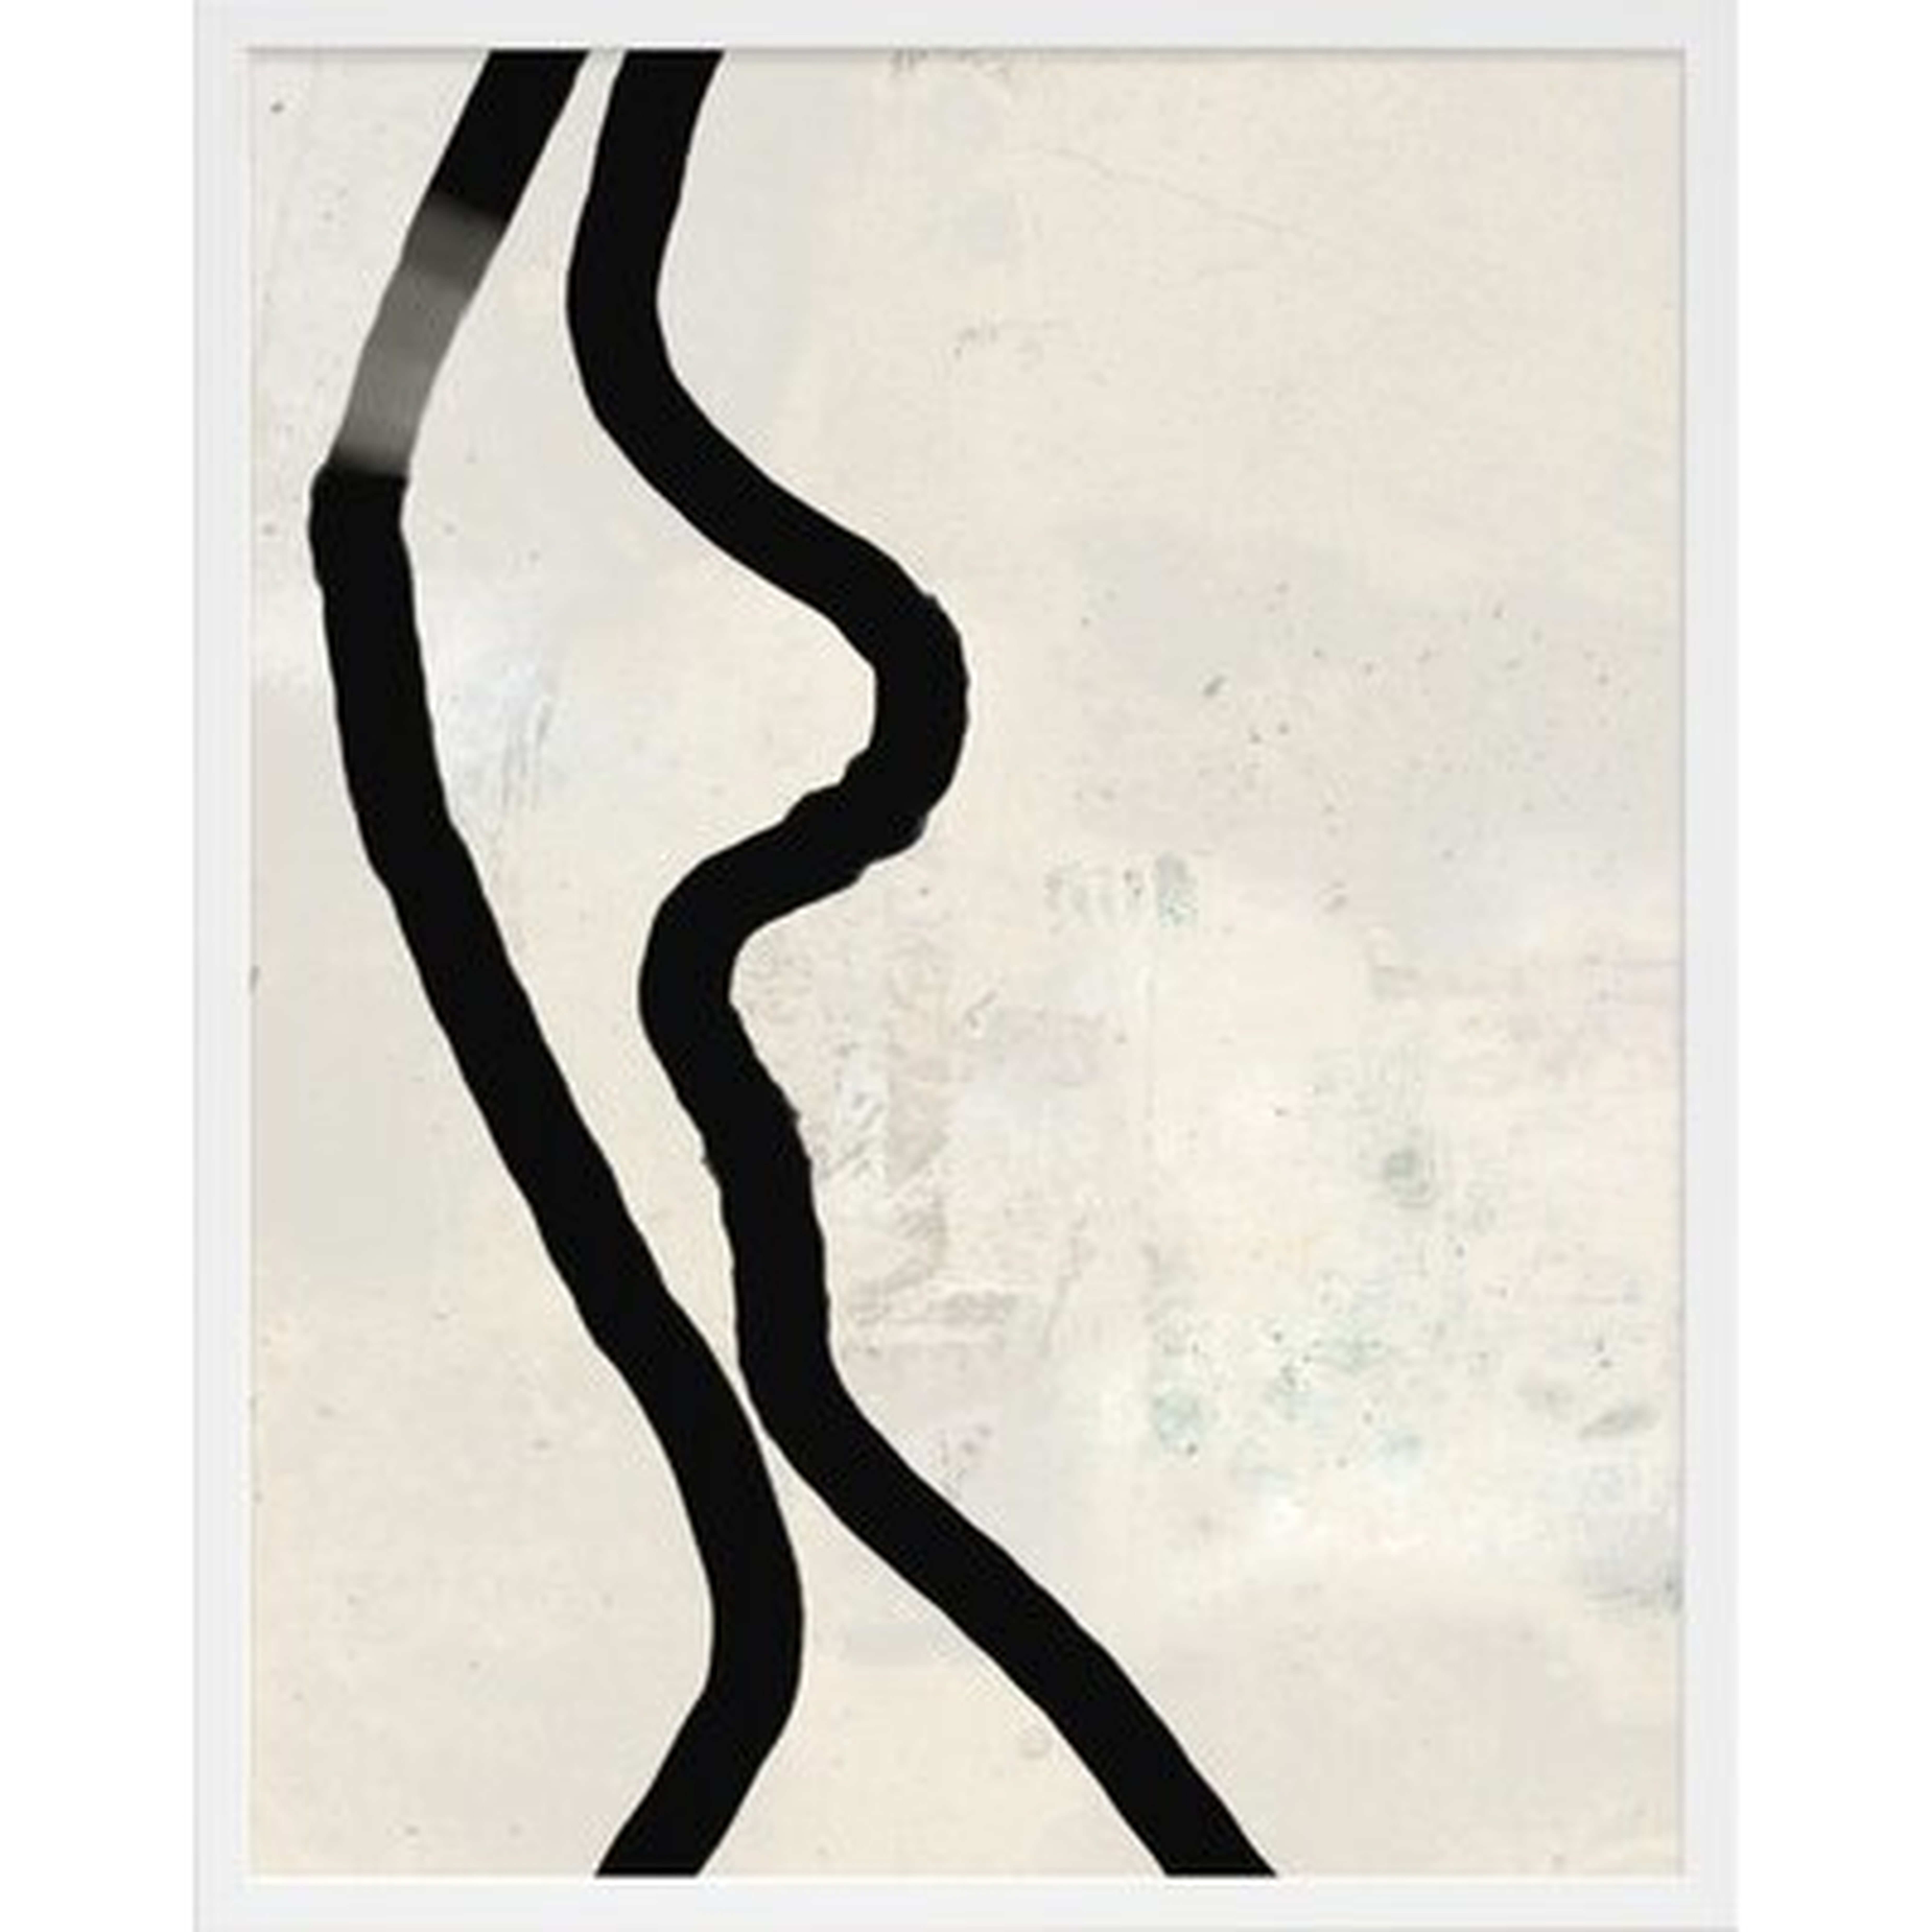 Black Rope 2 by Jacques Pilon - Picture Frame Painting Print on Paper - Wayfair